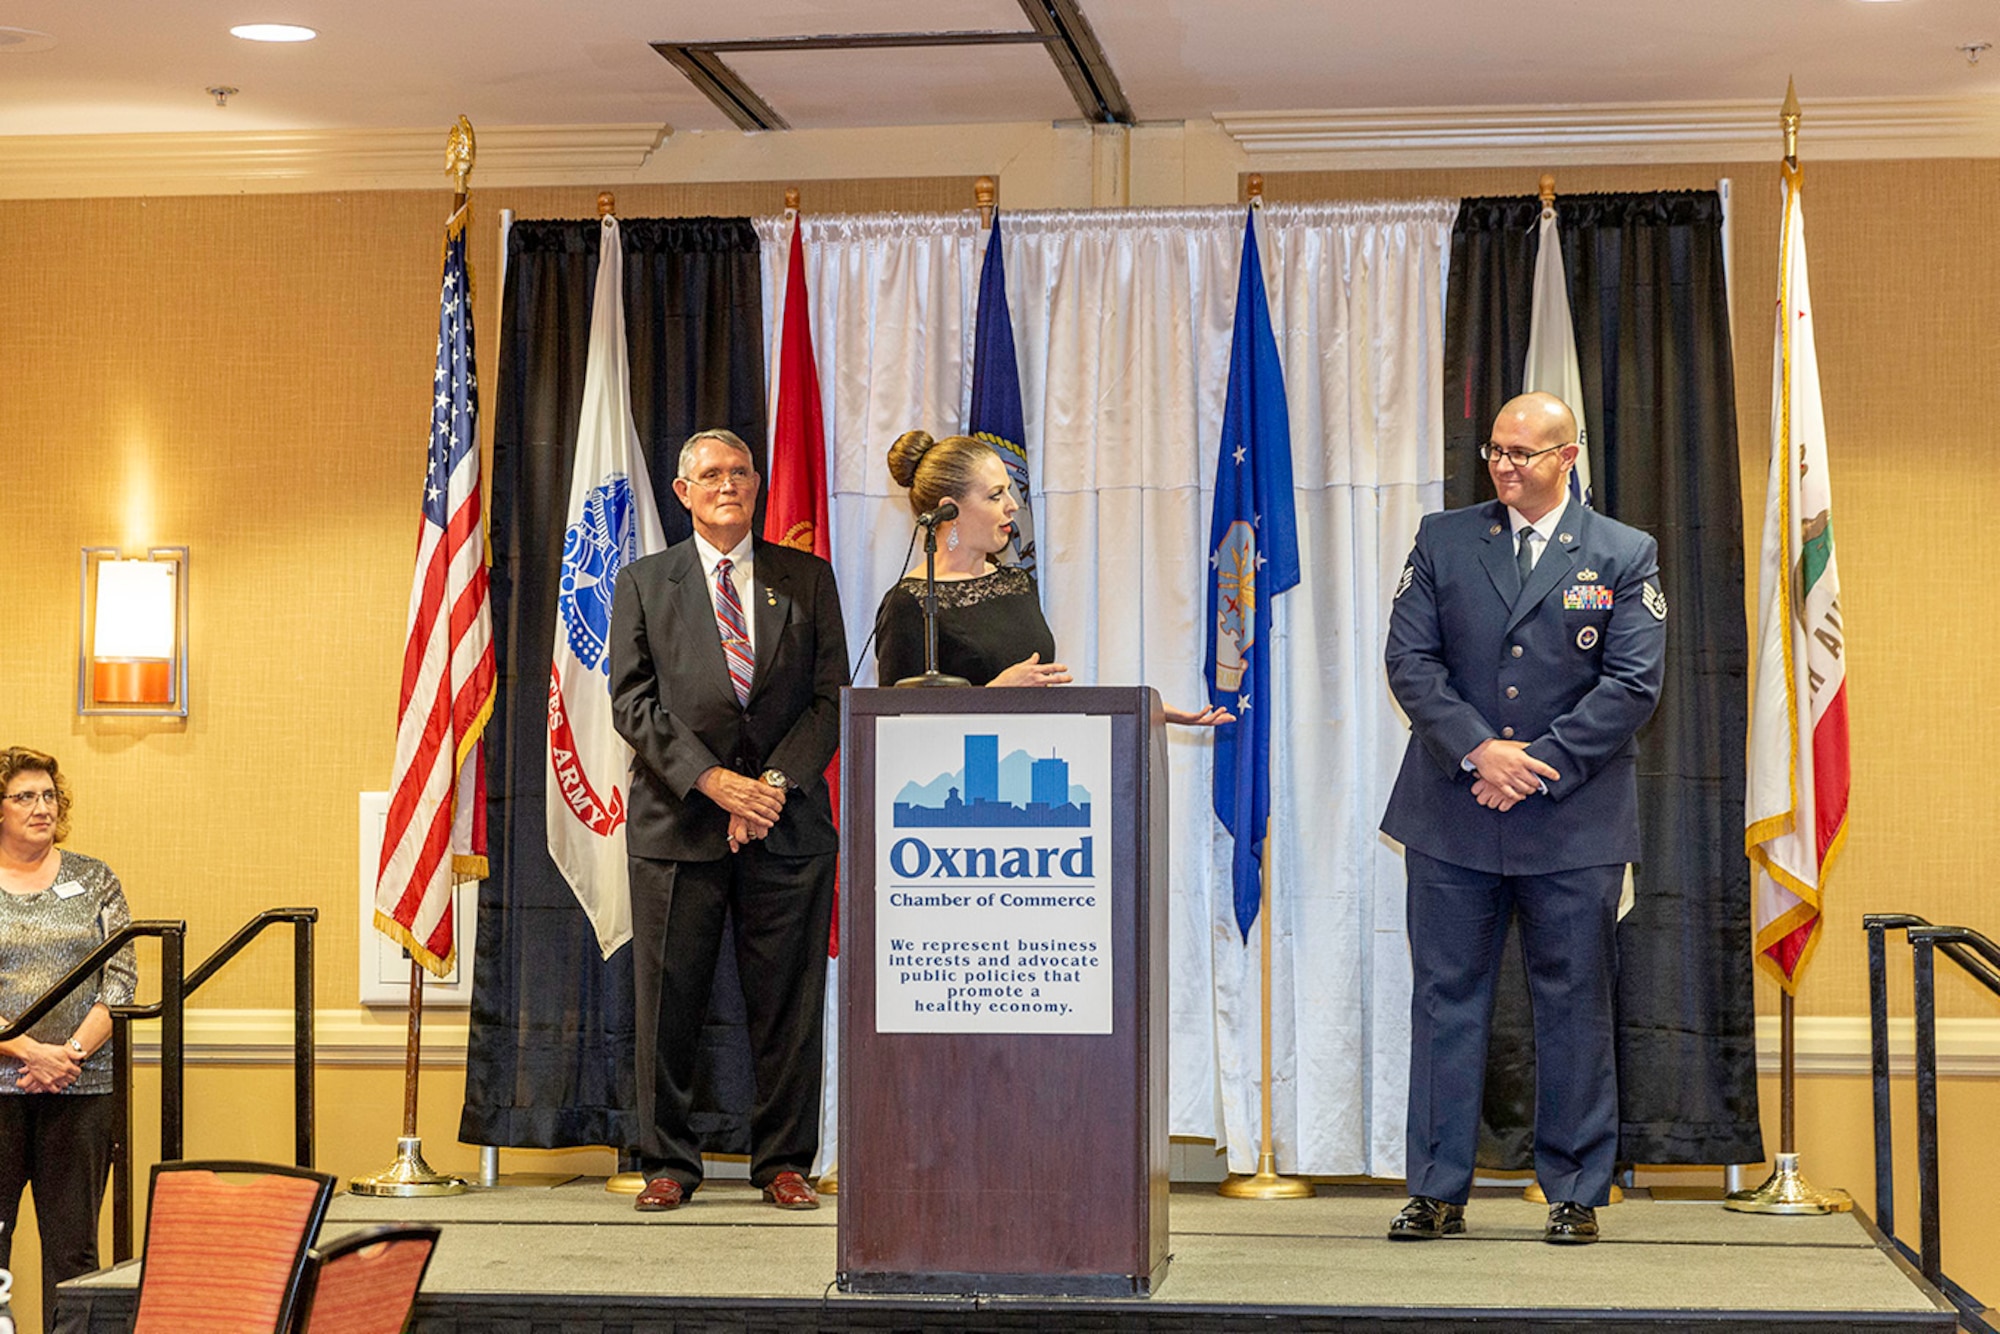 Staff Sgt. Mykal Tanner, a 344th Training Squadron Military Handling Equipment instructor, is recognized as the Oxnard Chamber of Commerce's Air Force Active Duty Member of the Year in a ceremony Sept. 20, 2019.